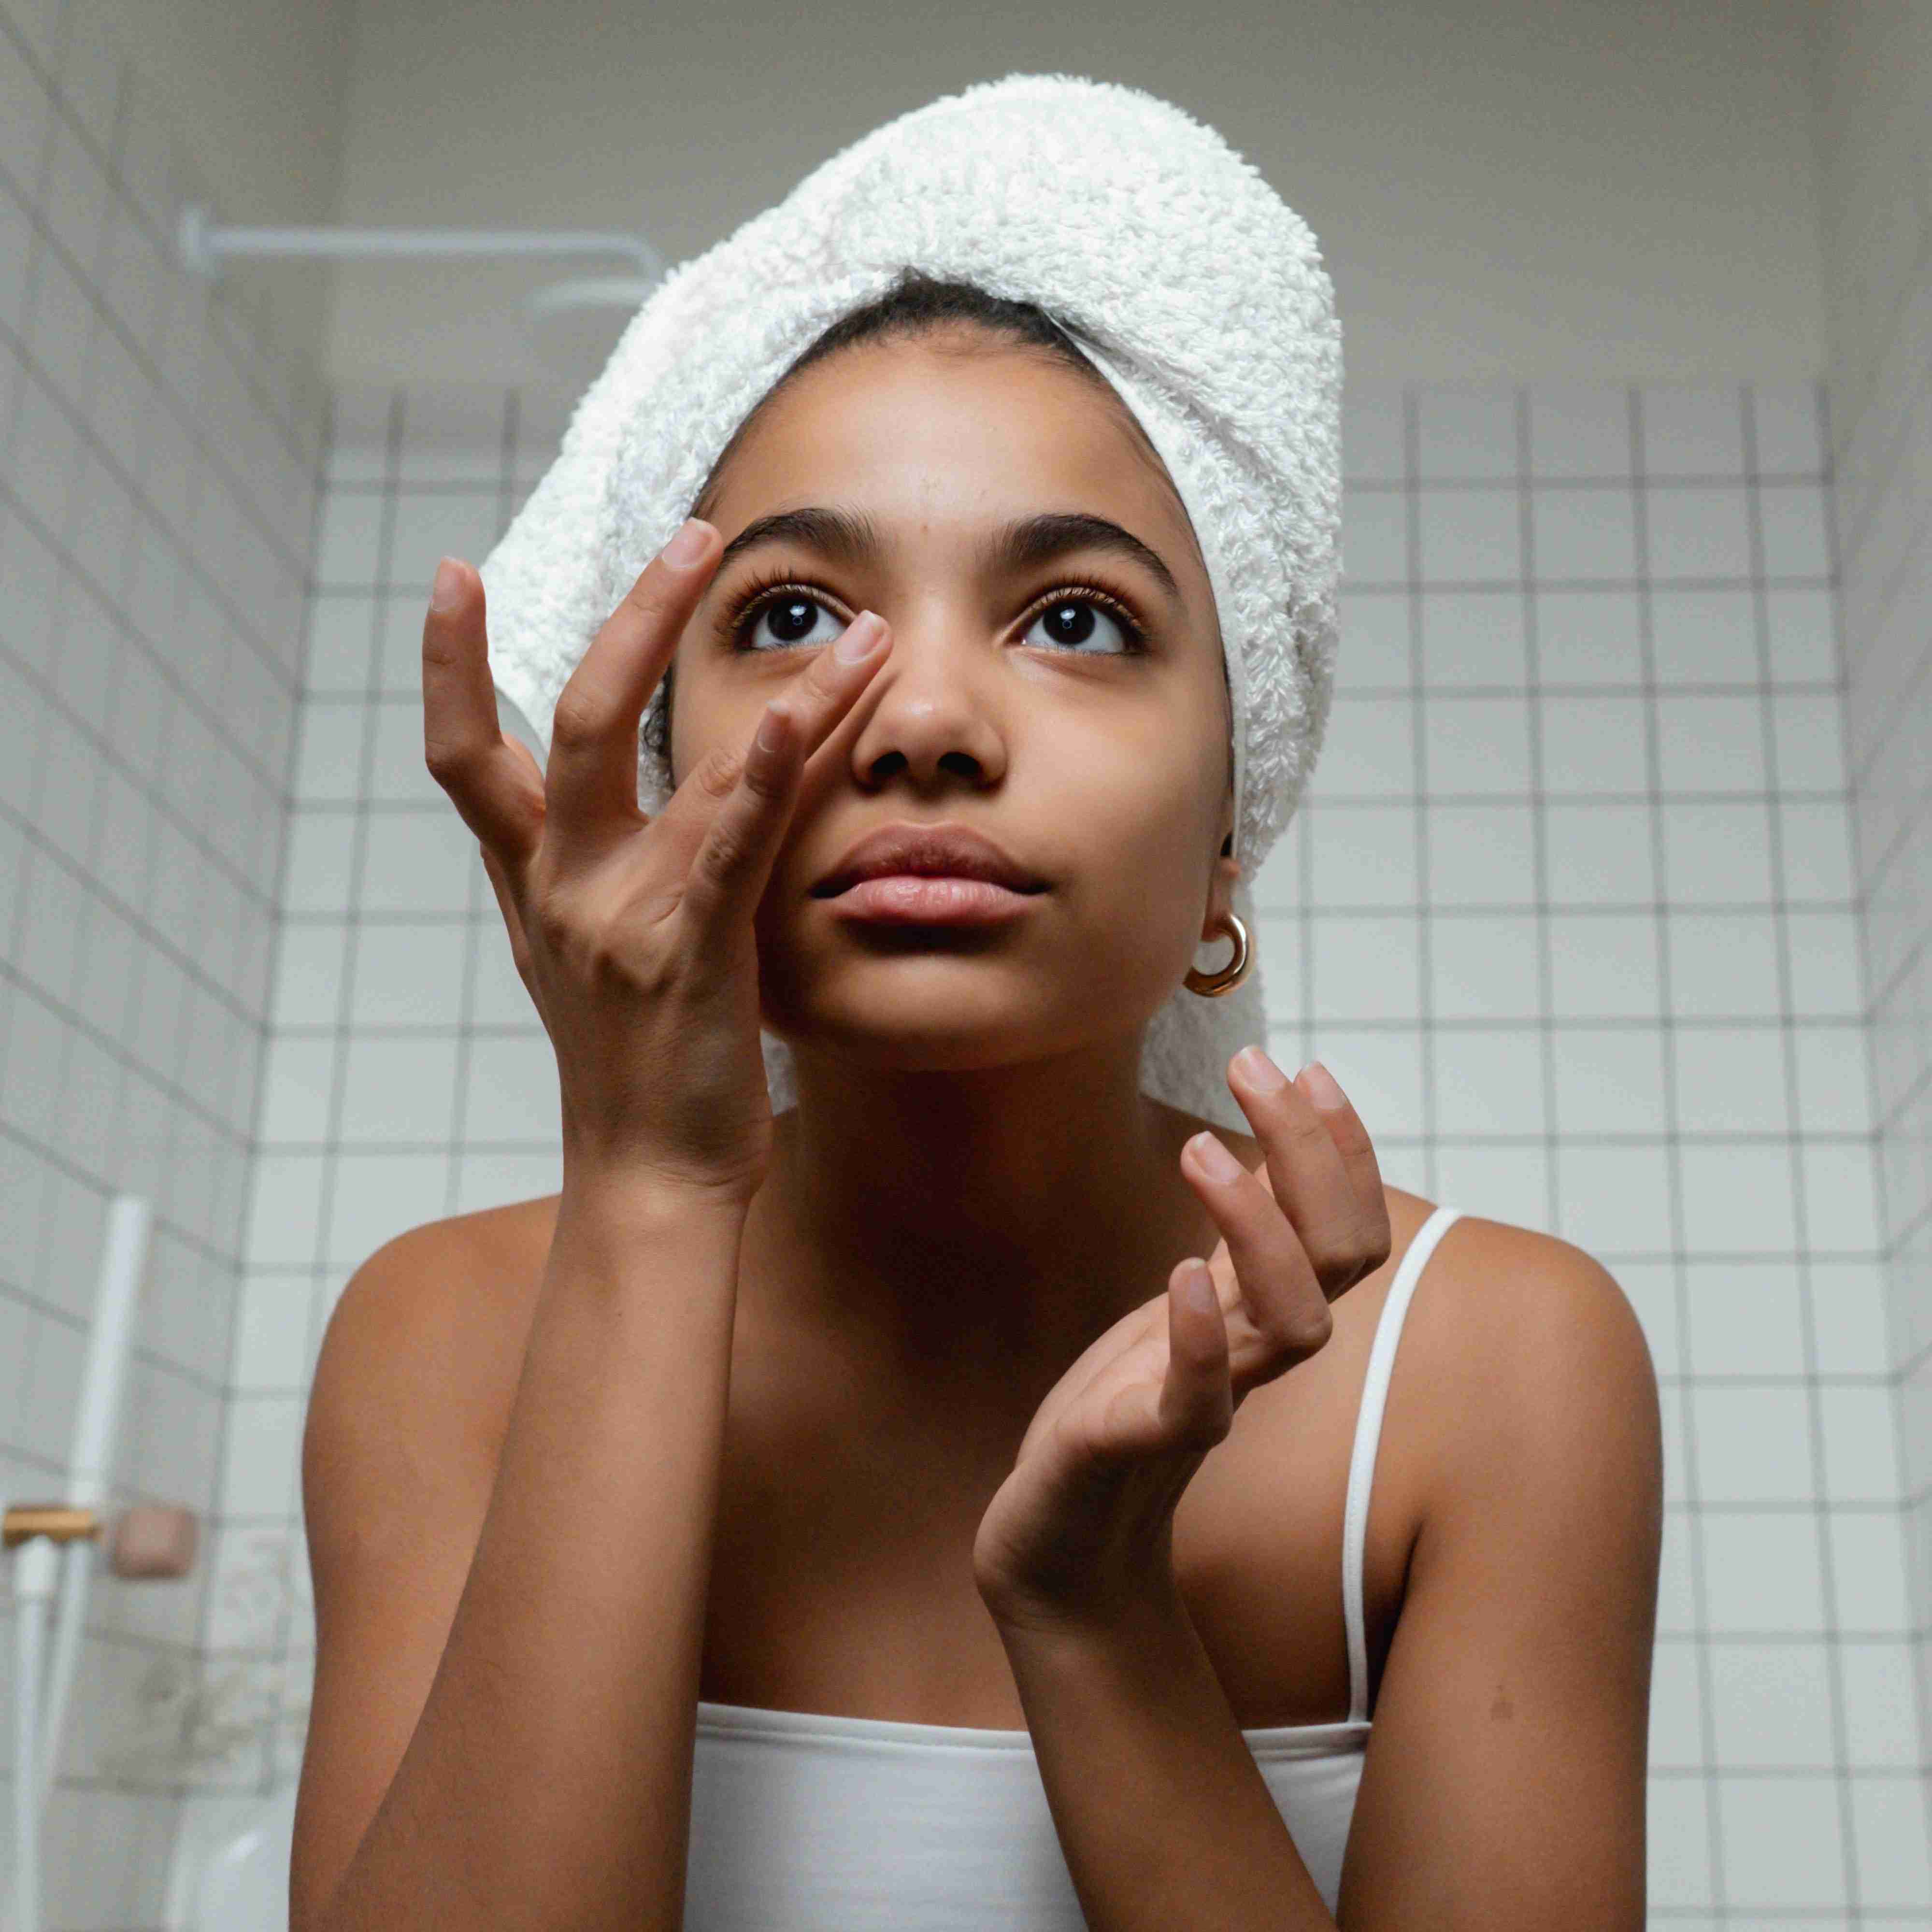 Woman doing her skincare with a towel on her head.